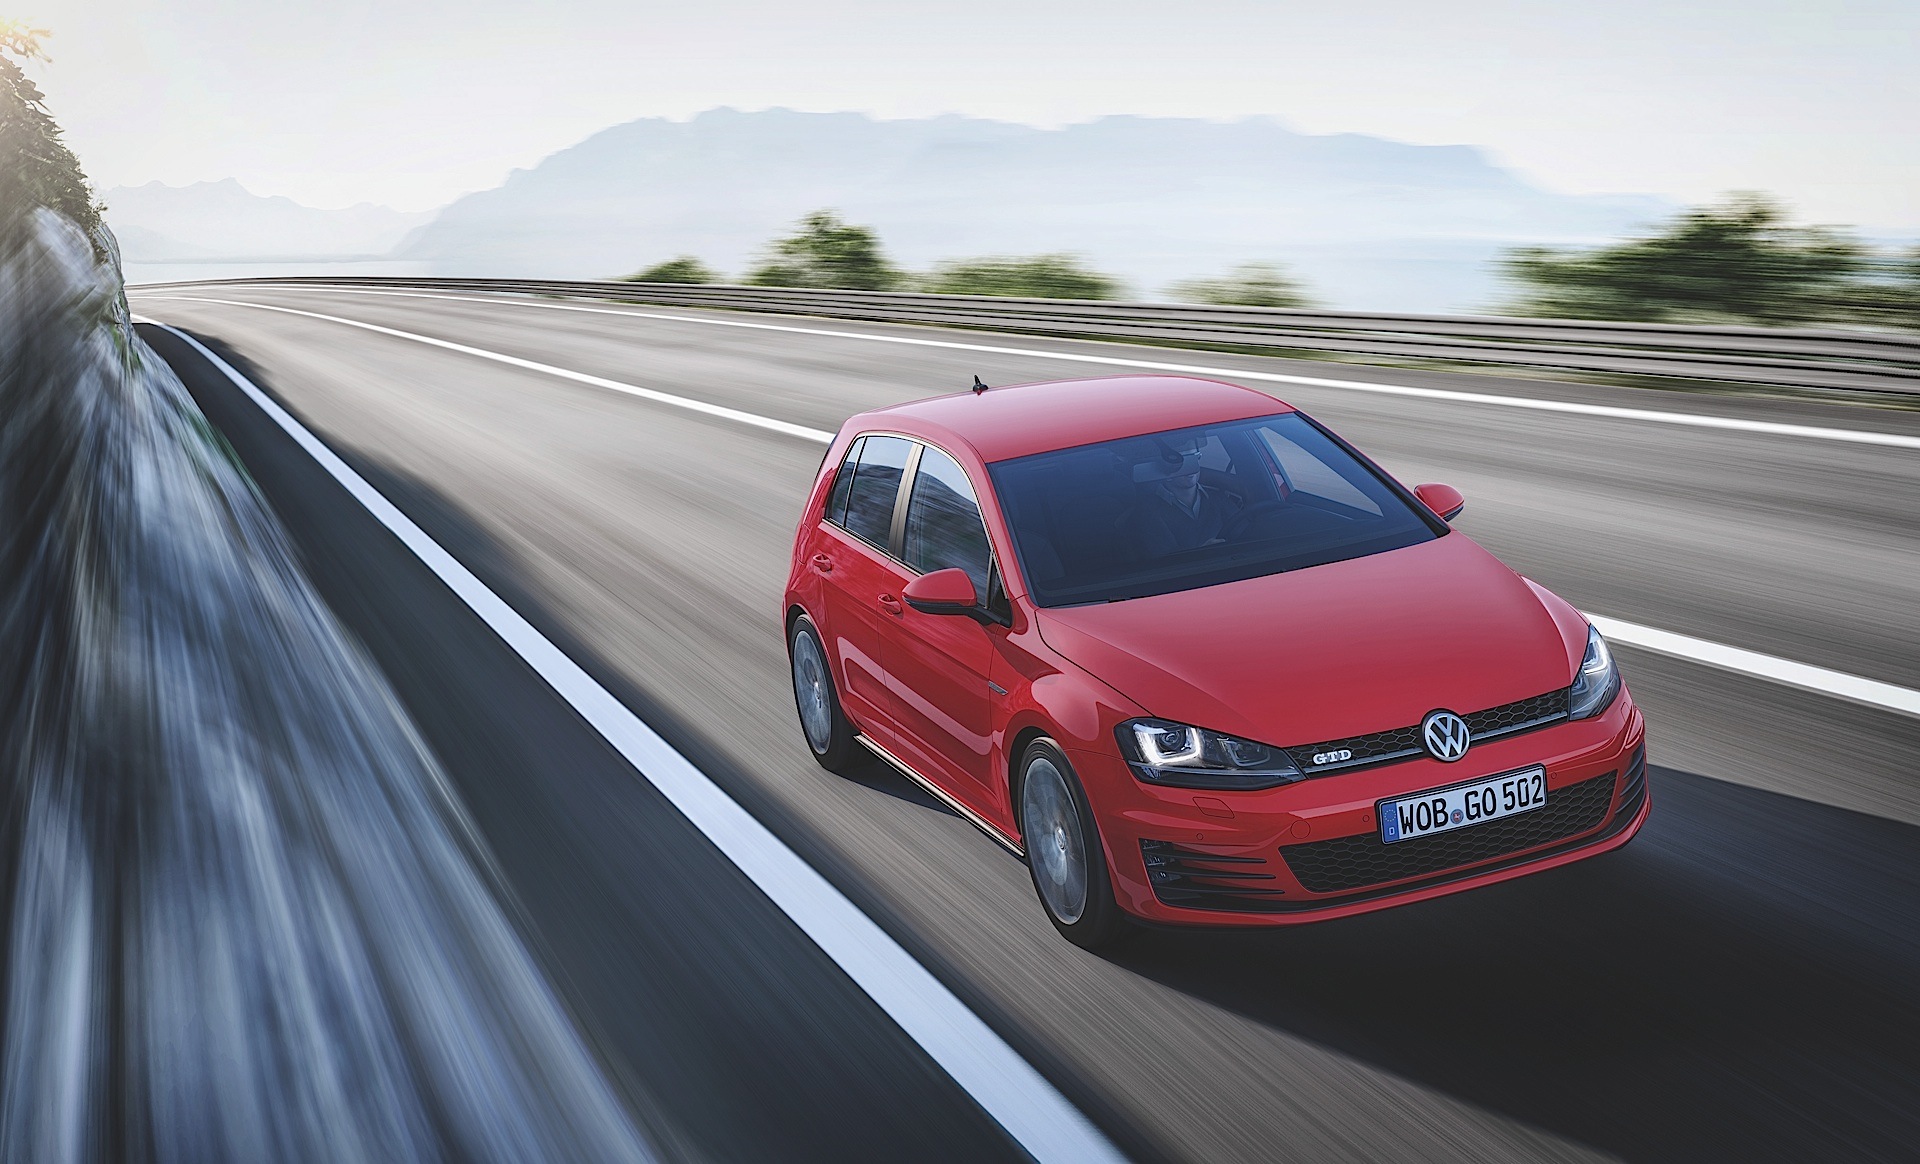 Volkswagen Golf 6 GTD Official Details and Photos - autoevolution